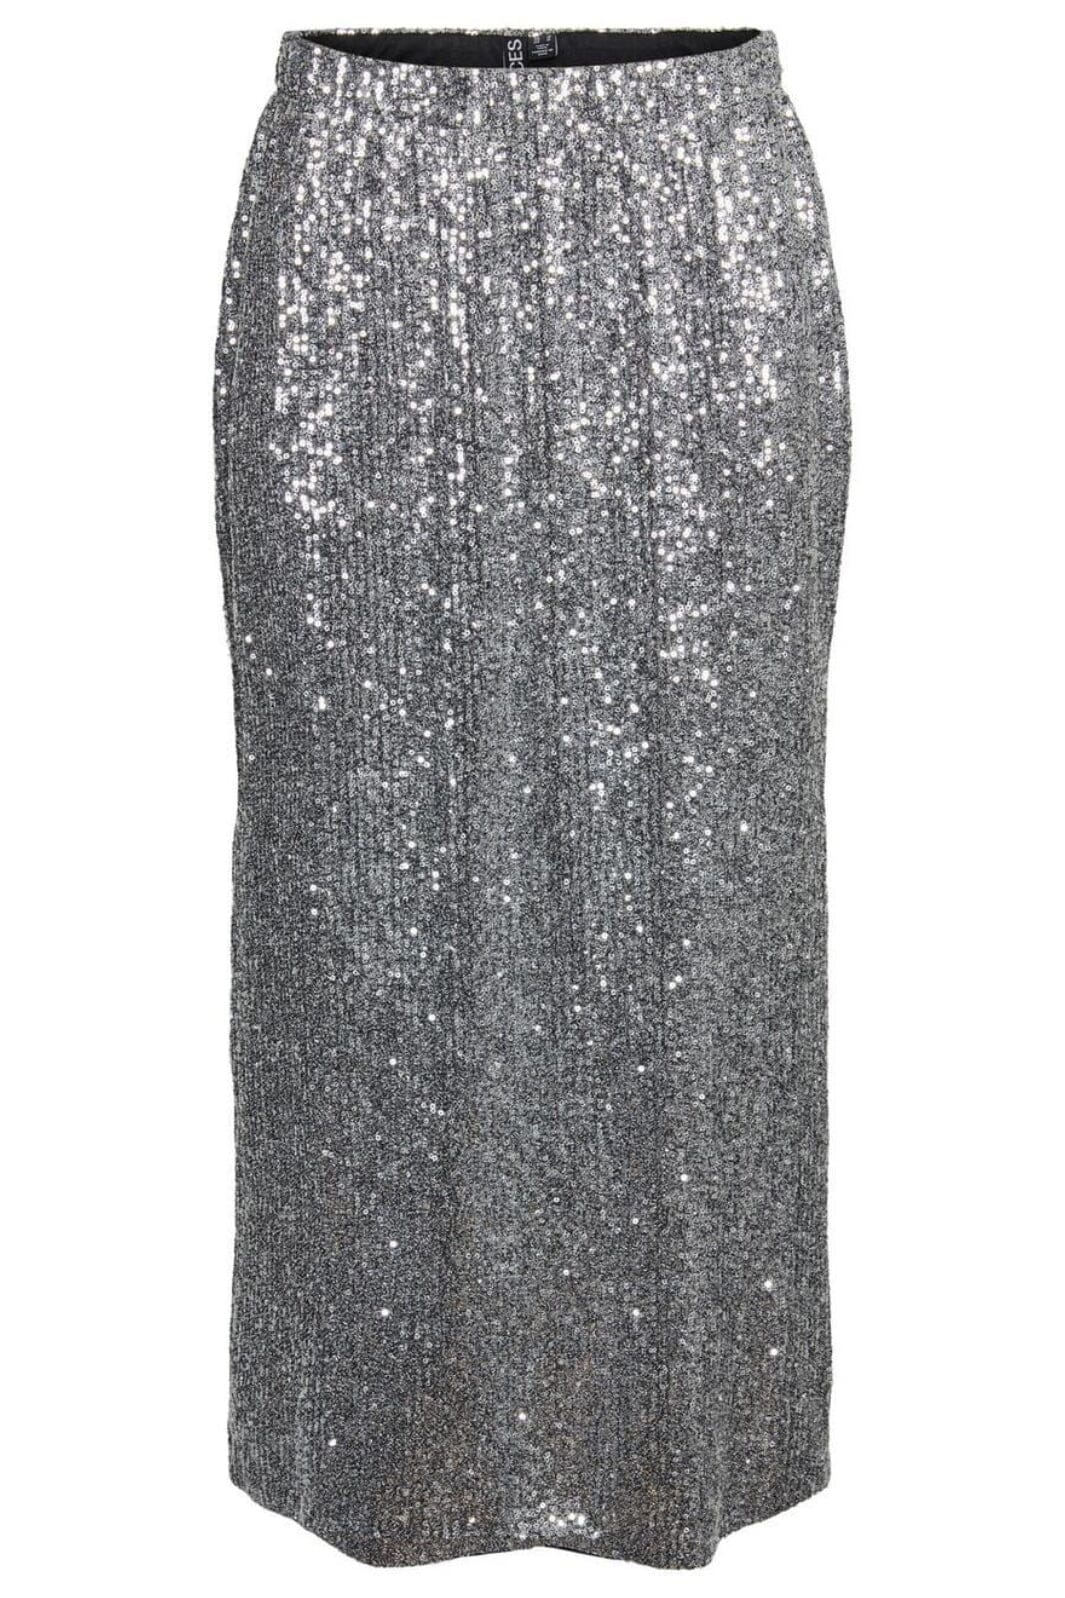 Pieces - Pcniri Ankle Skirt - 4509878 Silver Sequins Nederdele 